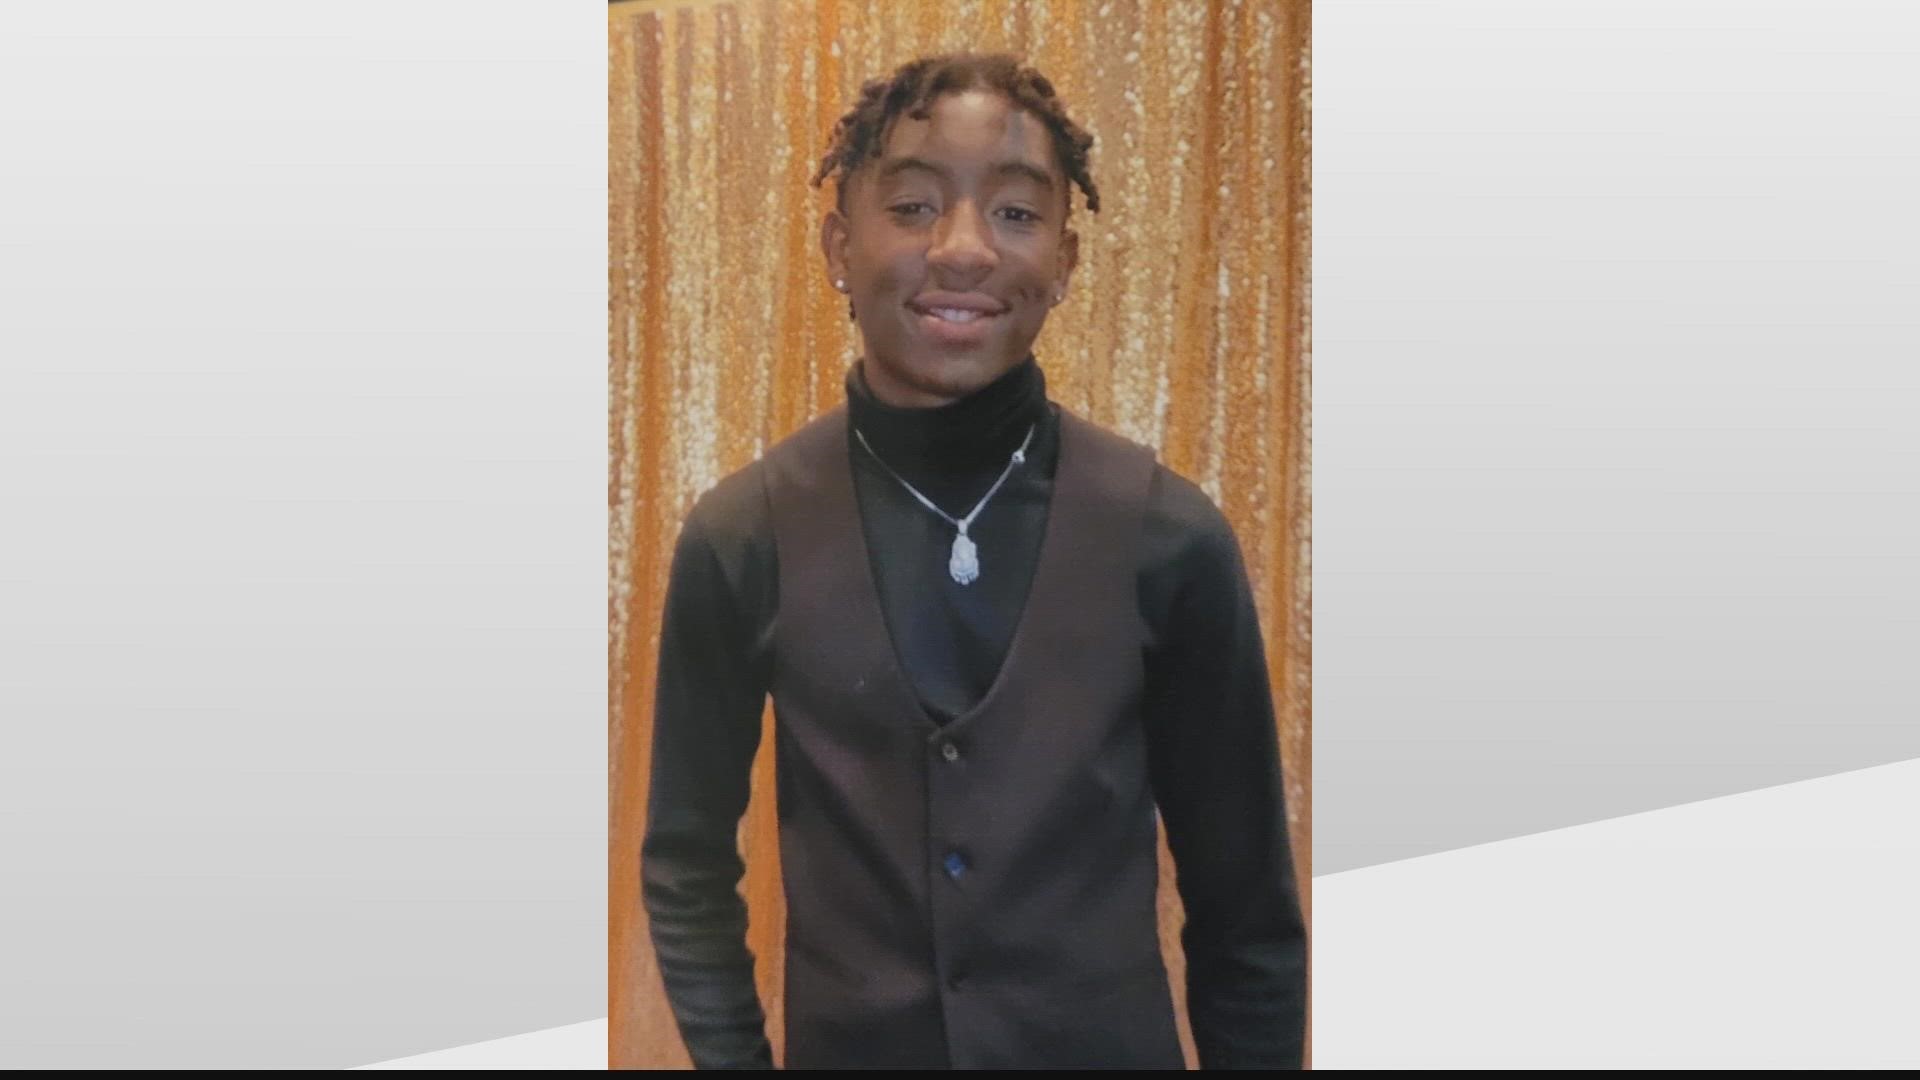 Police said Grayson Green of Marietta was found with a gunshot wound outside of a party at an apartment complex on May 21.